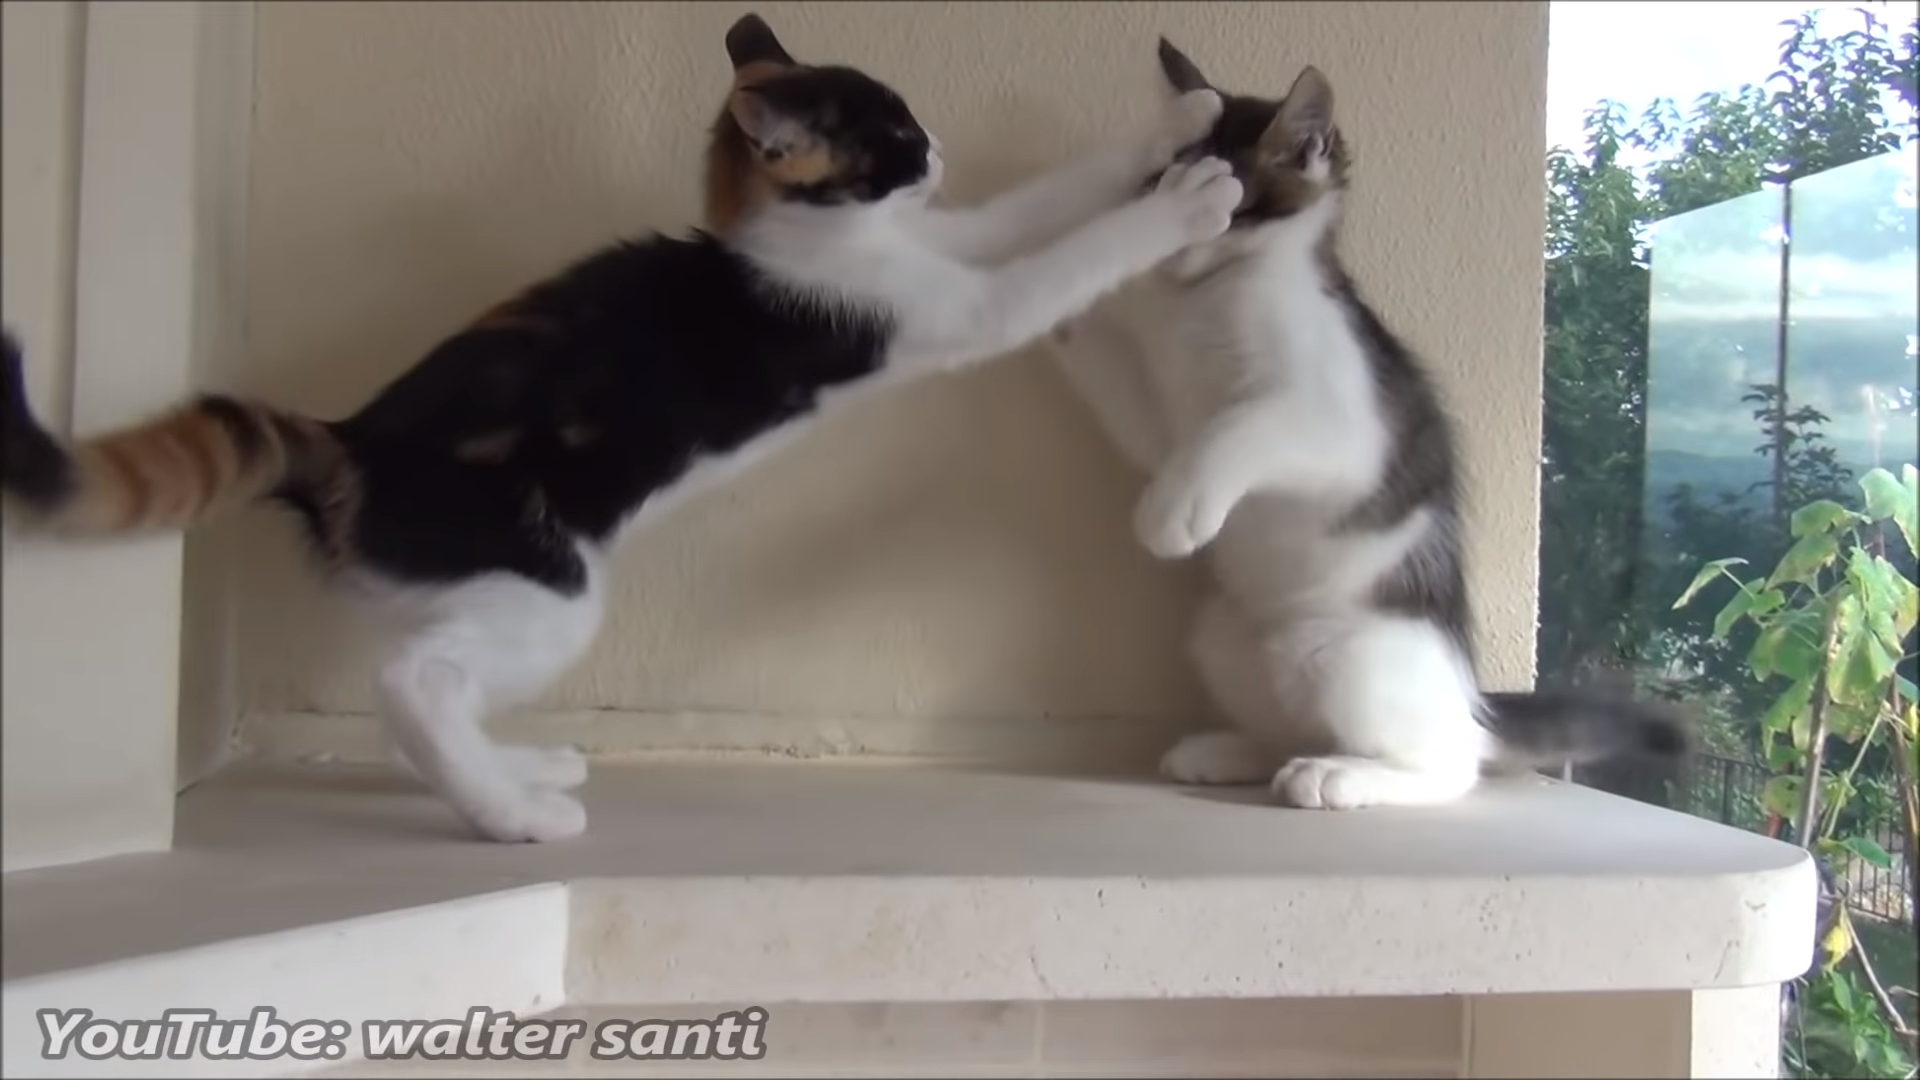 The most playful kittens in the world